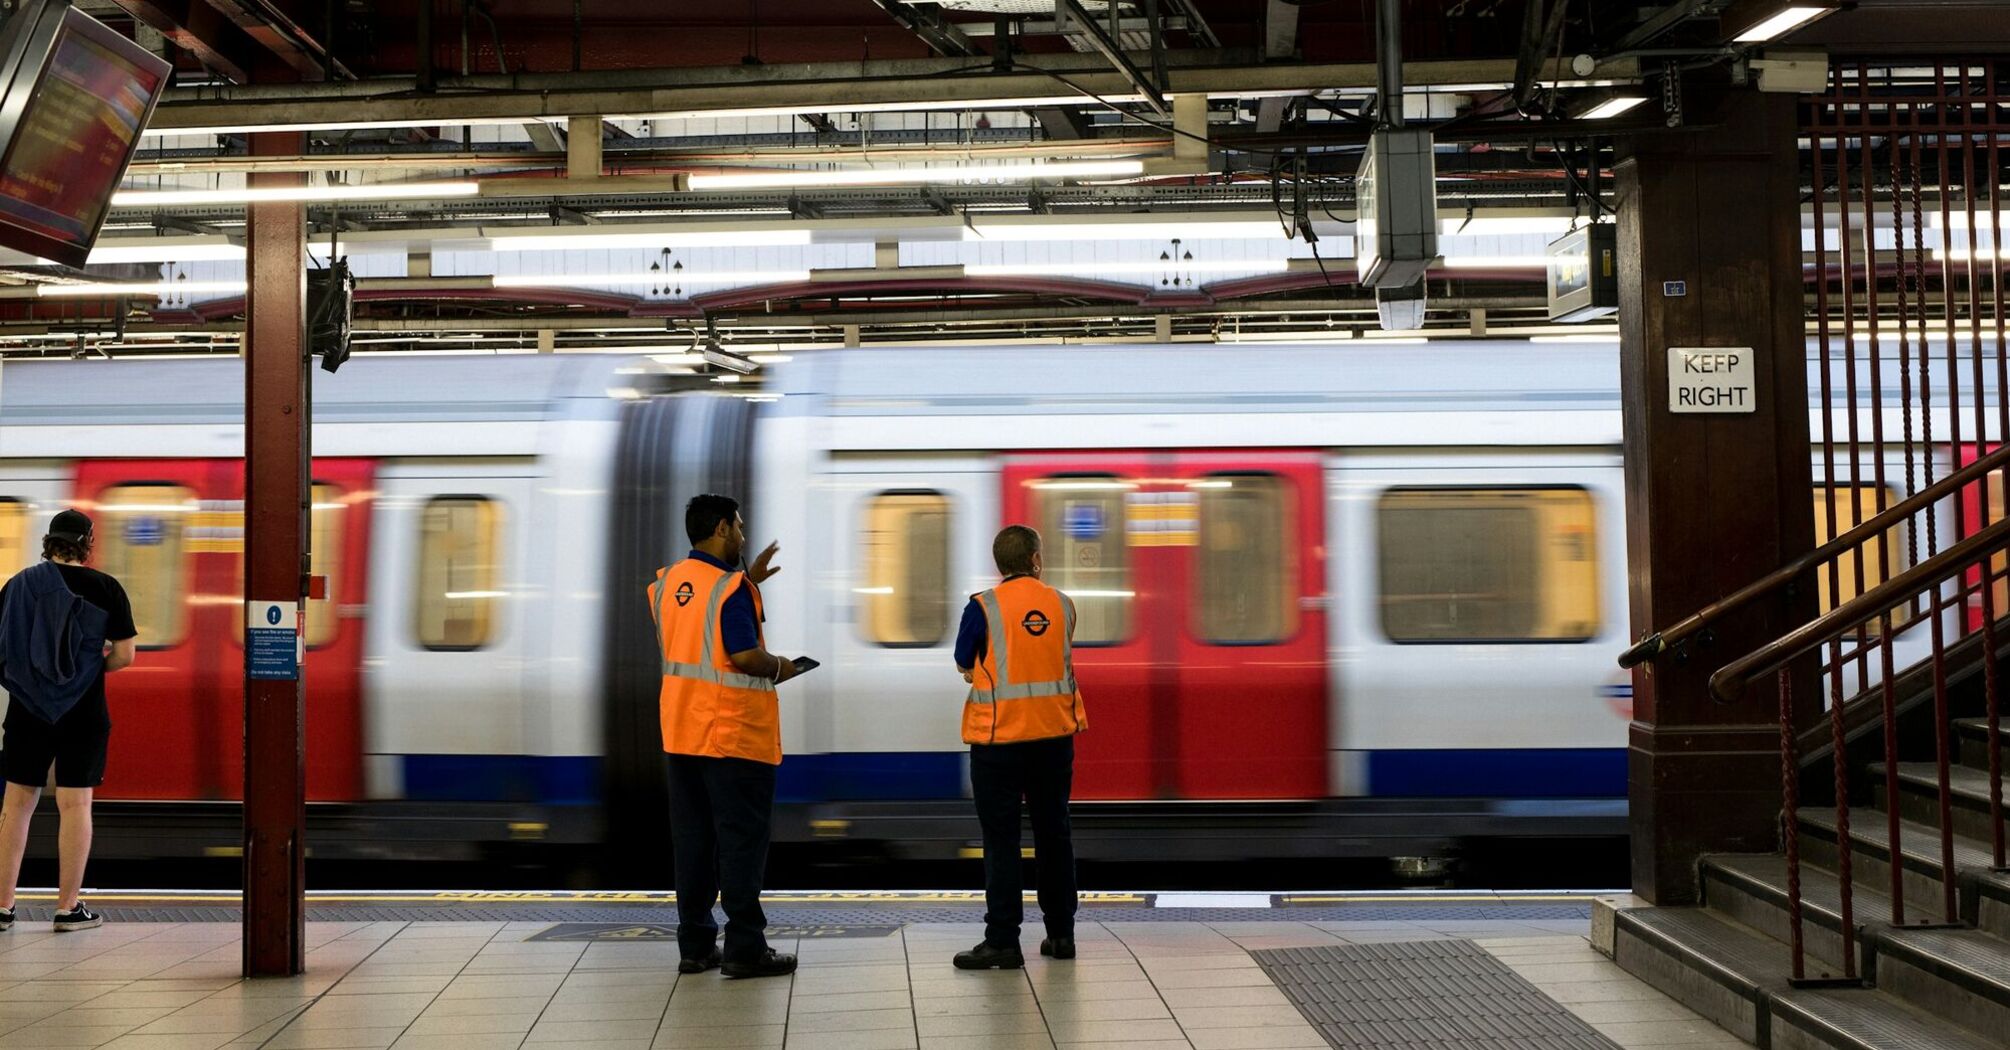 Two station workers in orange vests monitoring a rapidly moving train at an underground platform